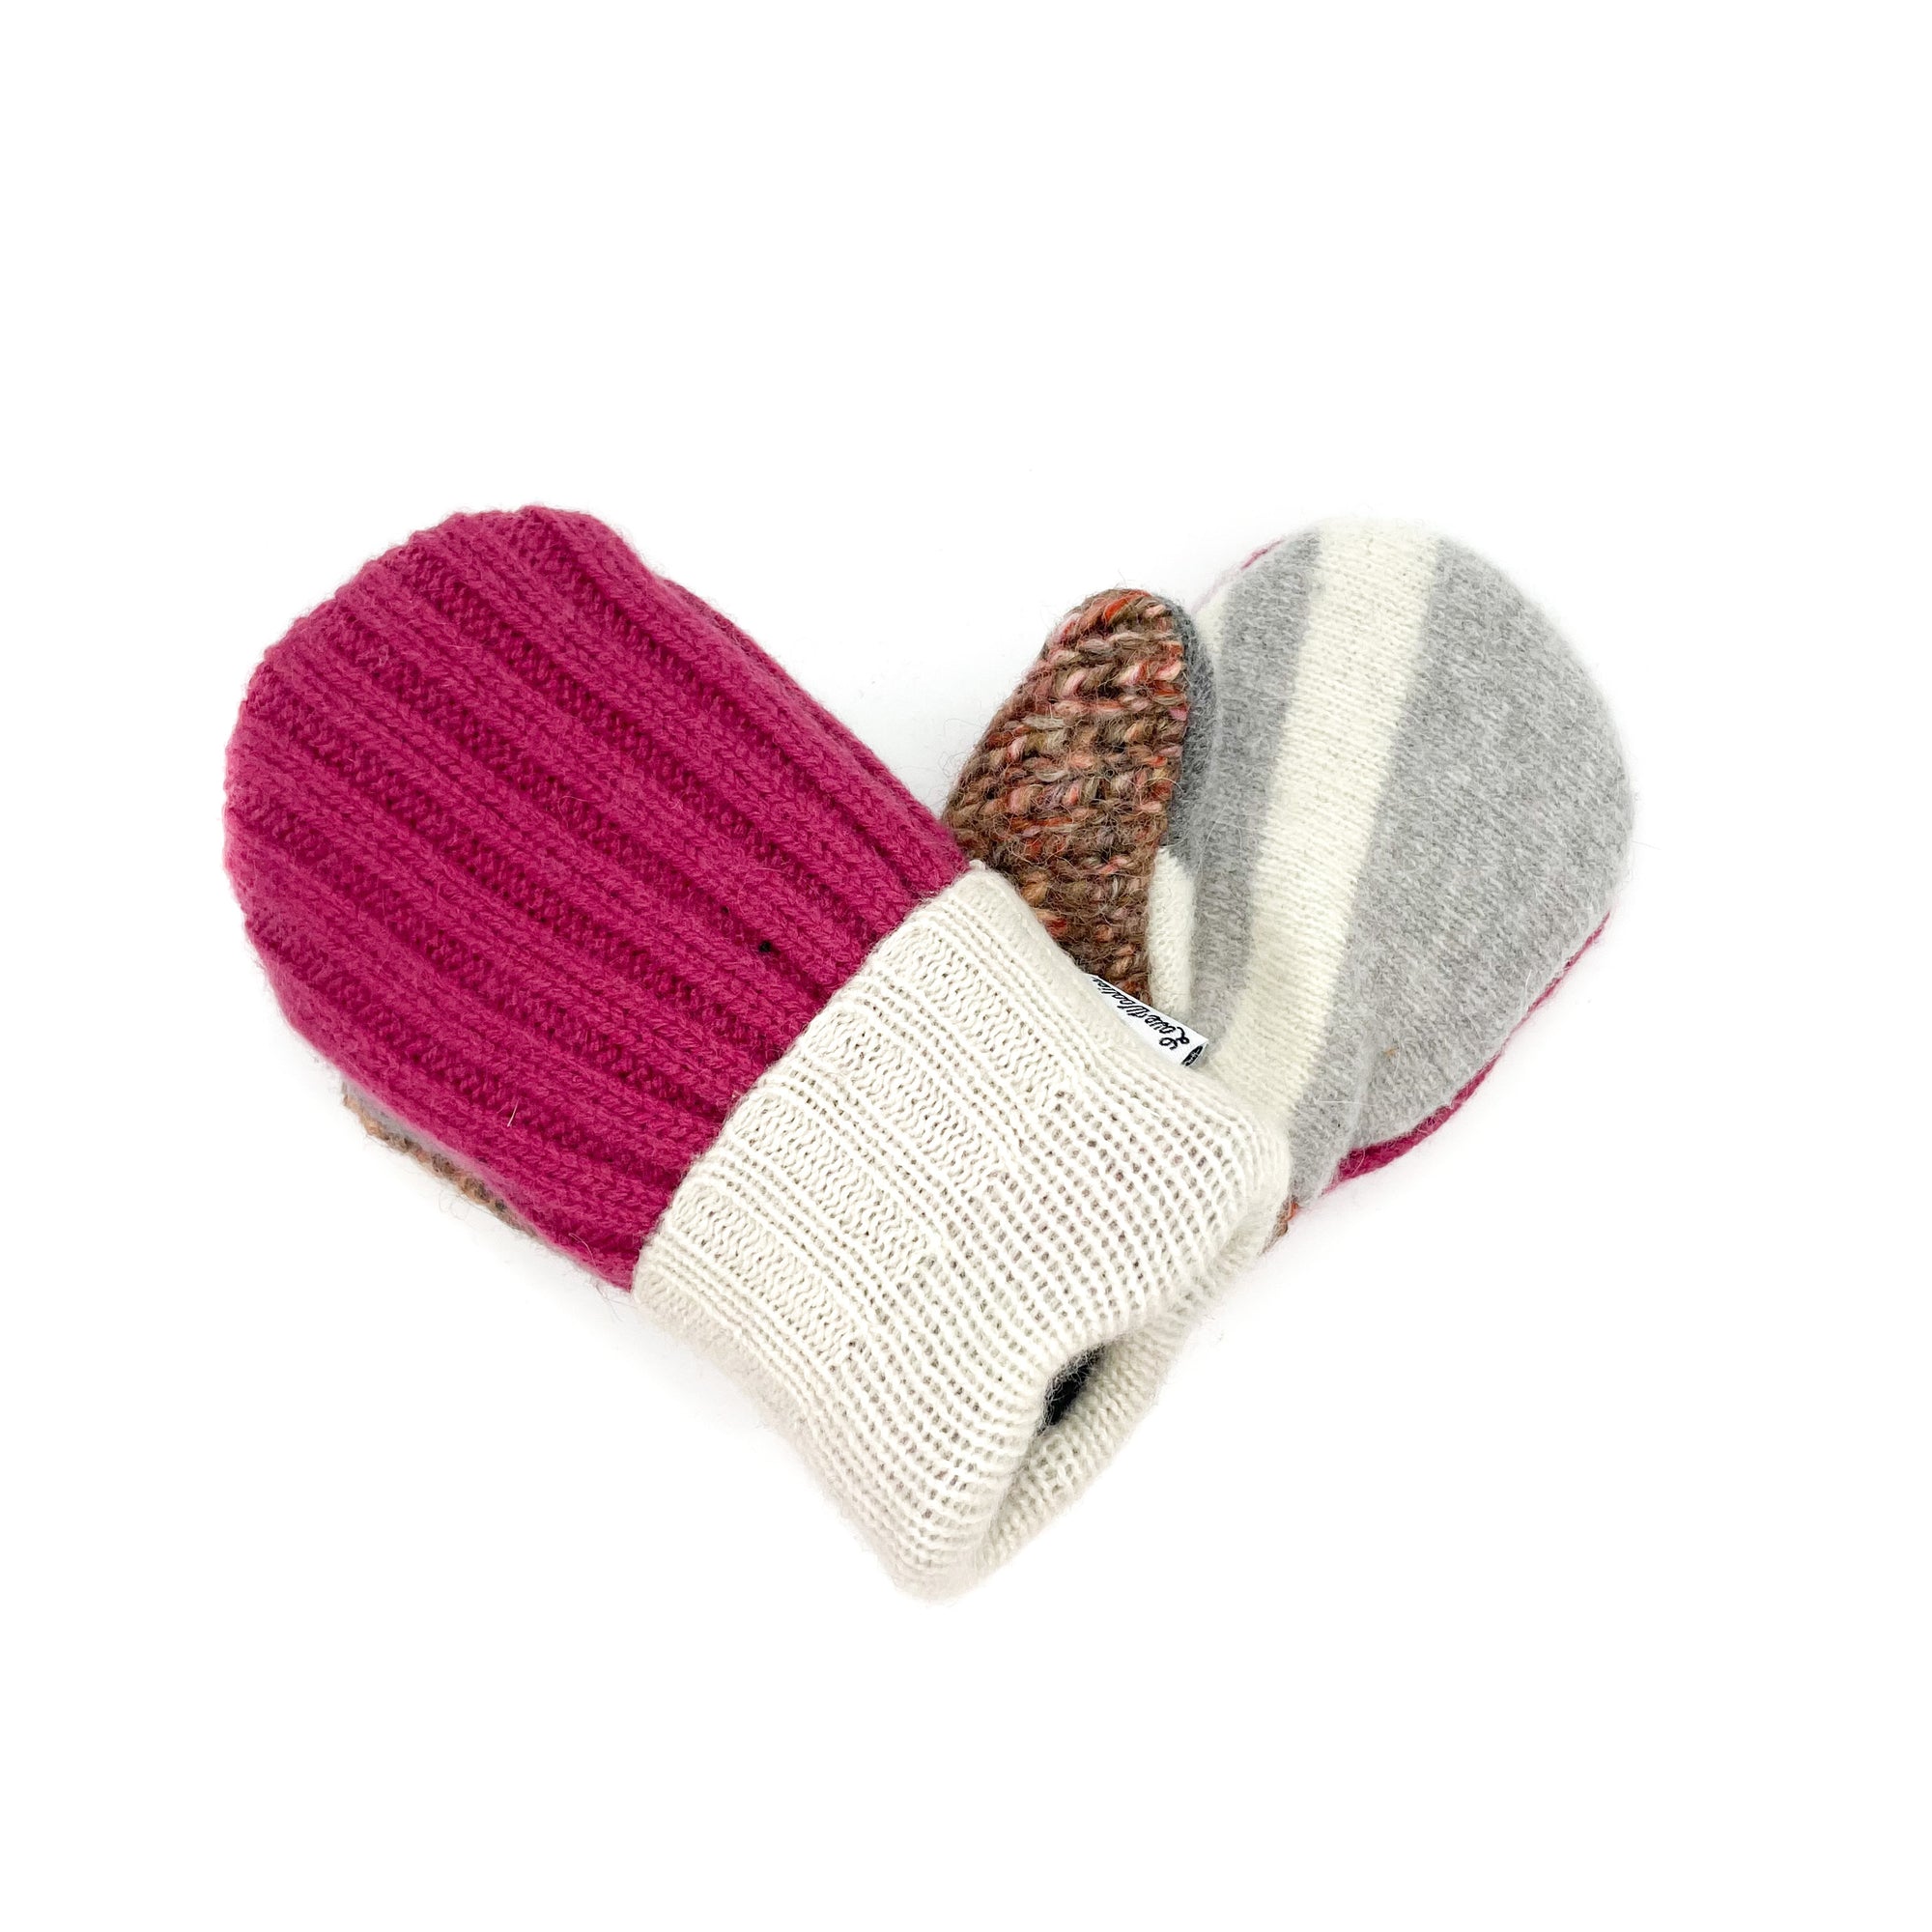 Large Kid's Wool Sweater Mittens | Warm and Cozy